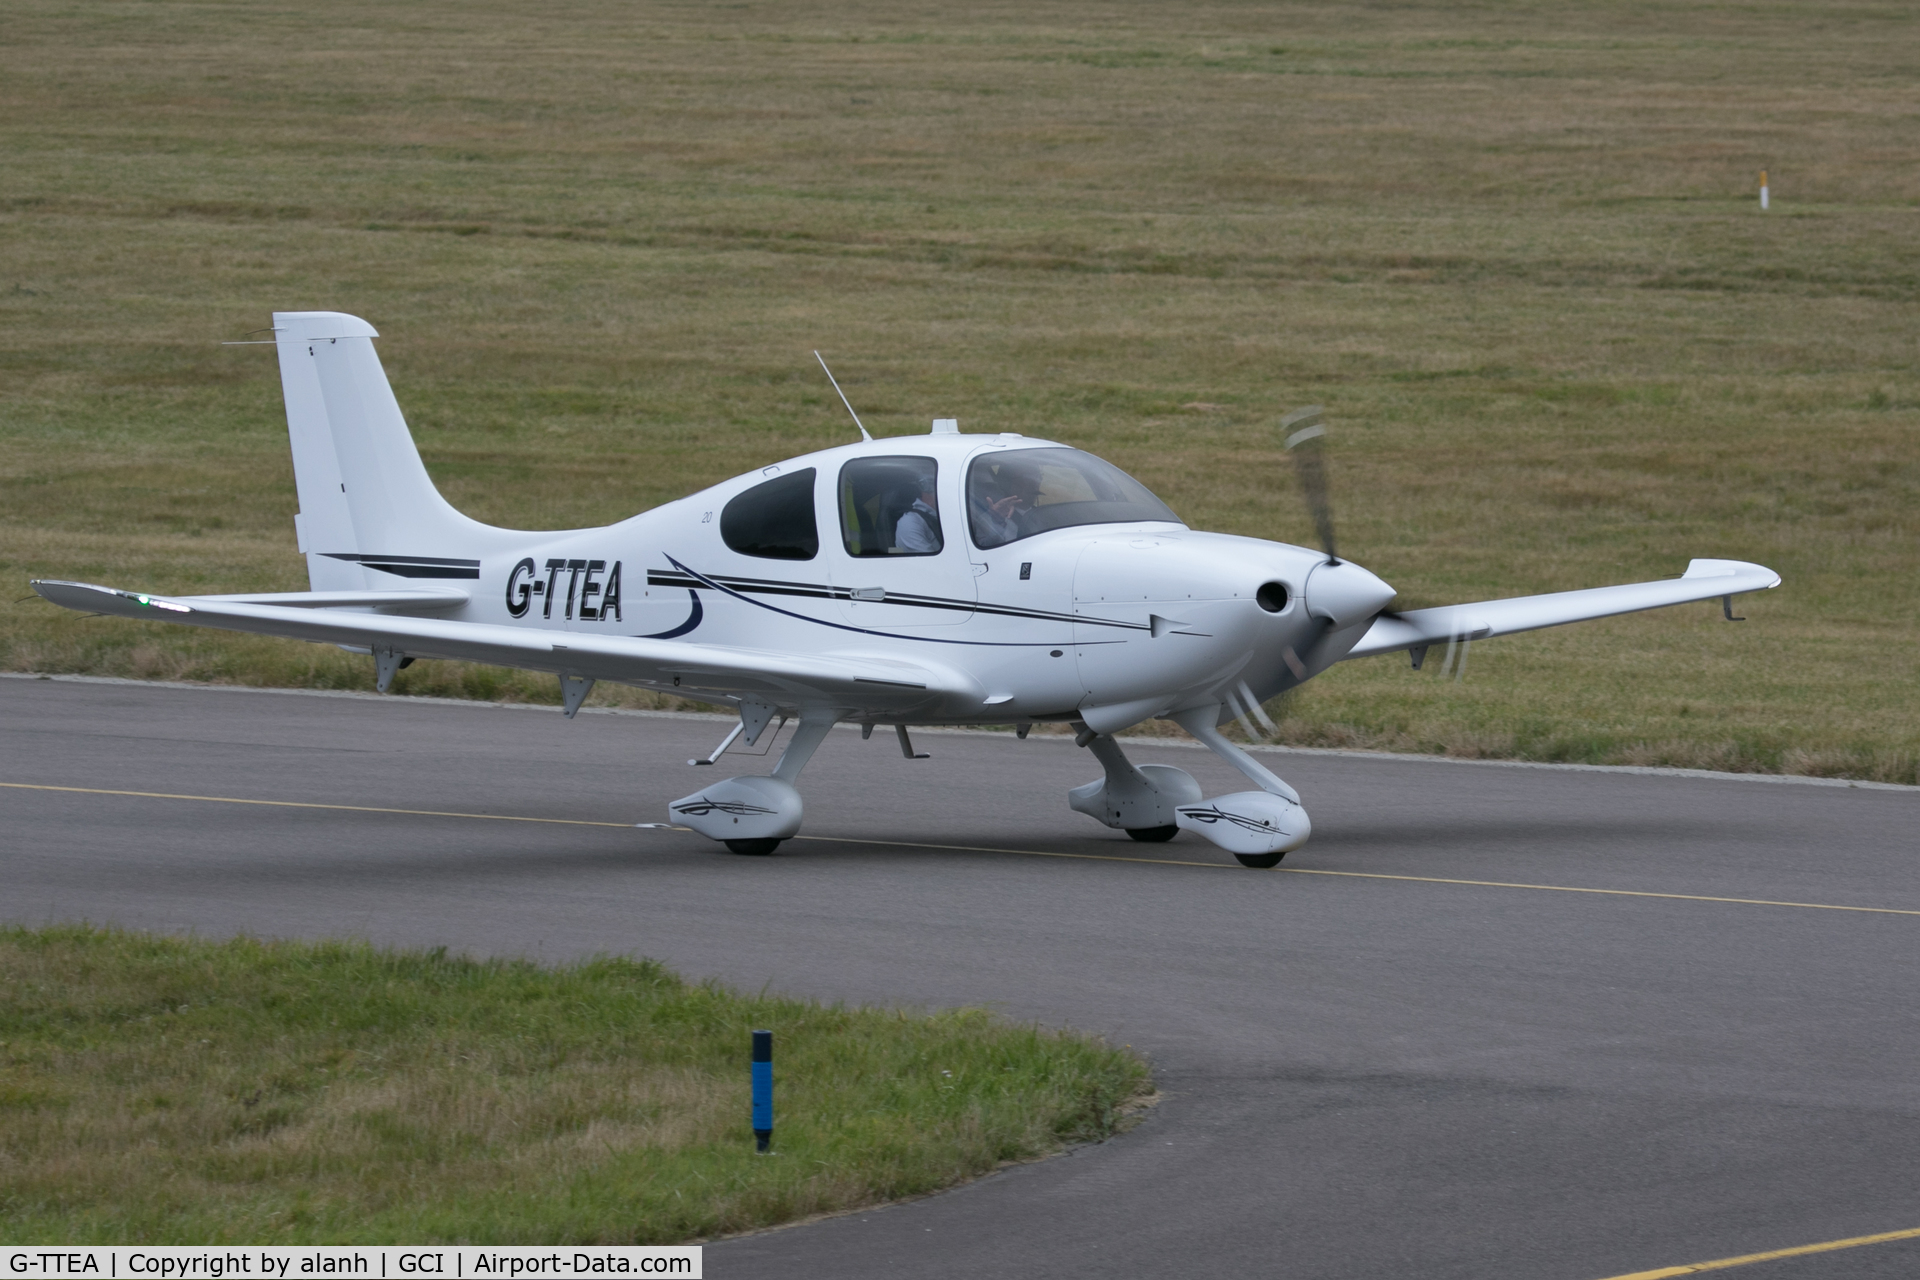 G-TTEA, 2017 Cirrus SR20 C/N 2351, Taxying after arrival at Guernsey